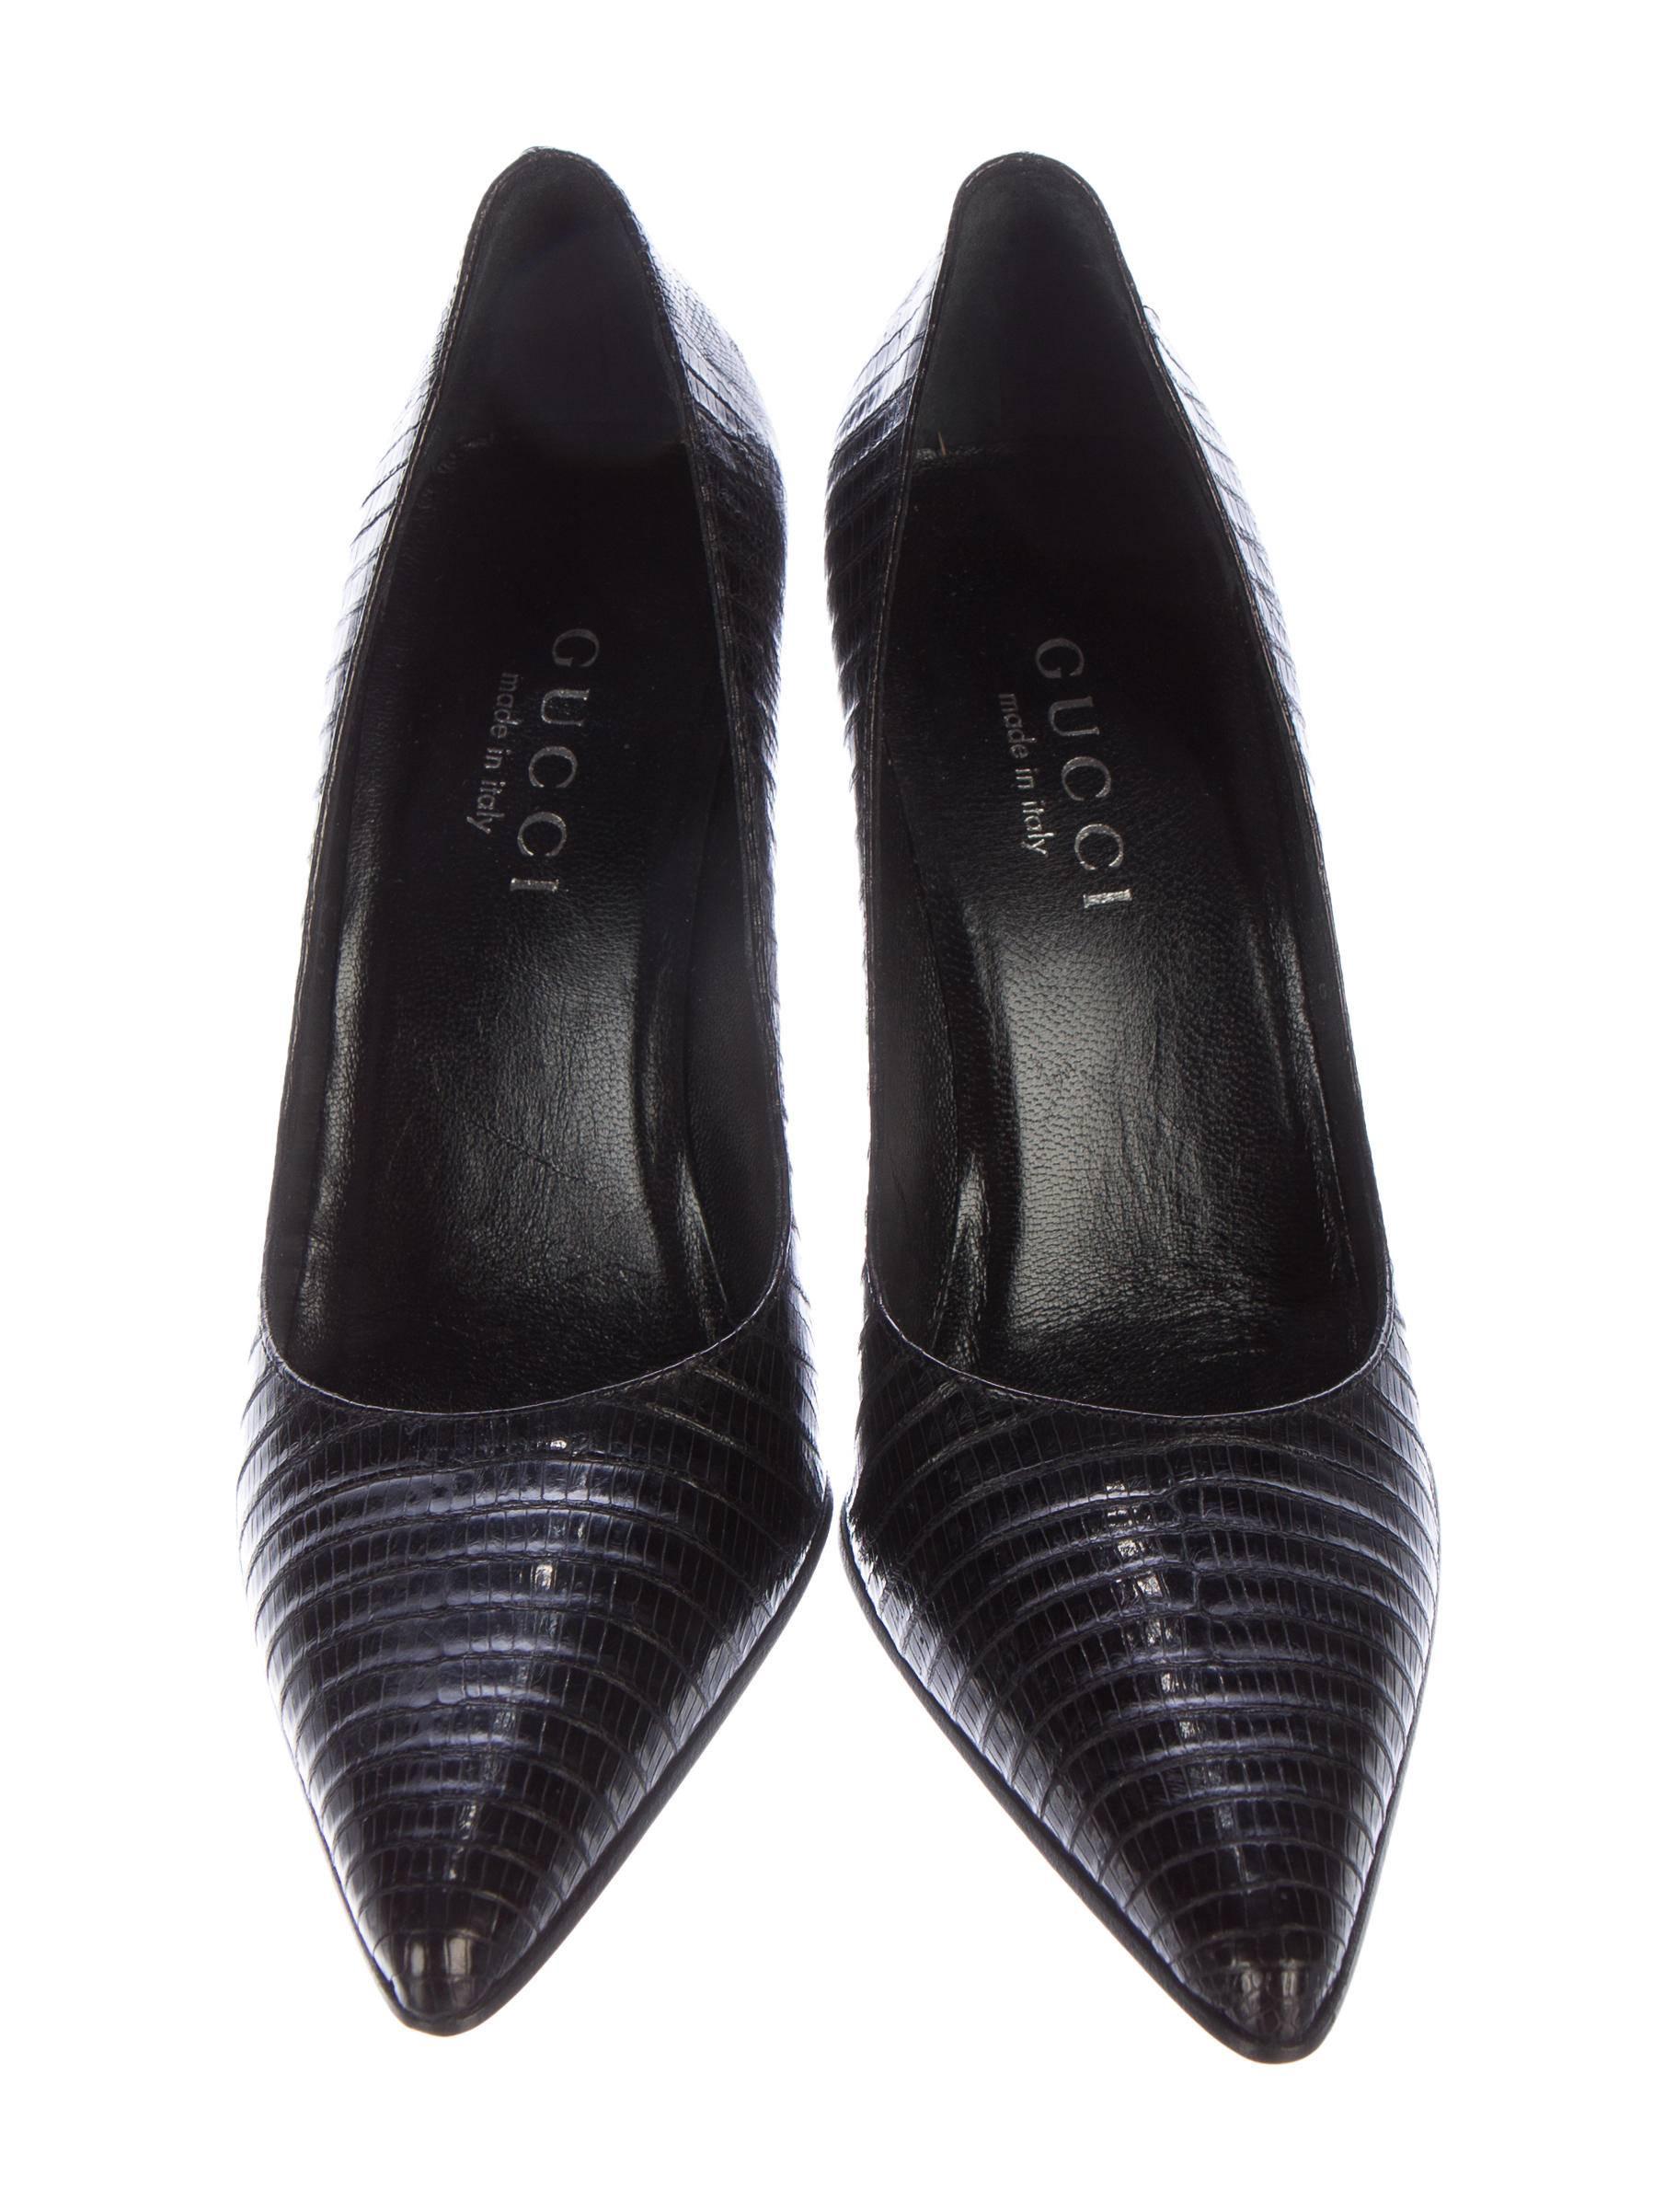 CURATOR'S NOTES

Gucci New Black Lizard Skin Leather Heels Pumps in Box 

Size IT 36
Lizard 
Slip on
Made in Italy
Heel height 4